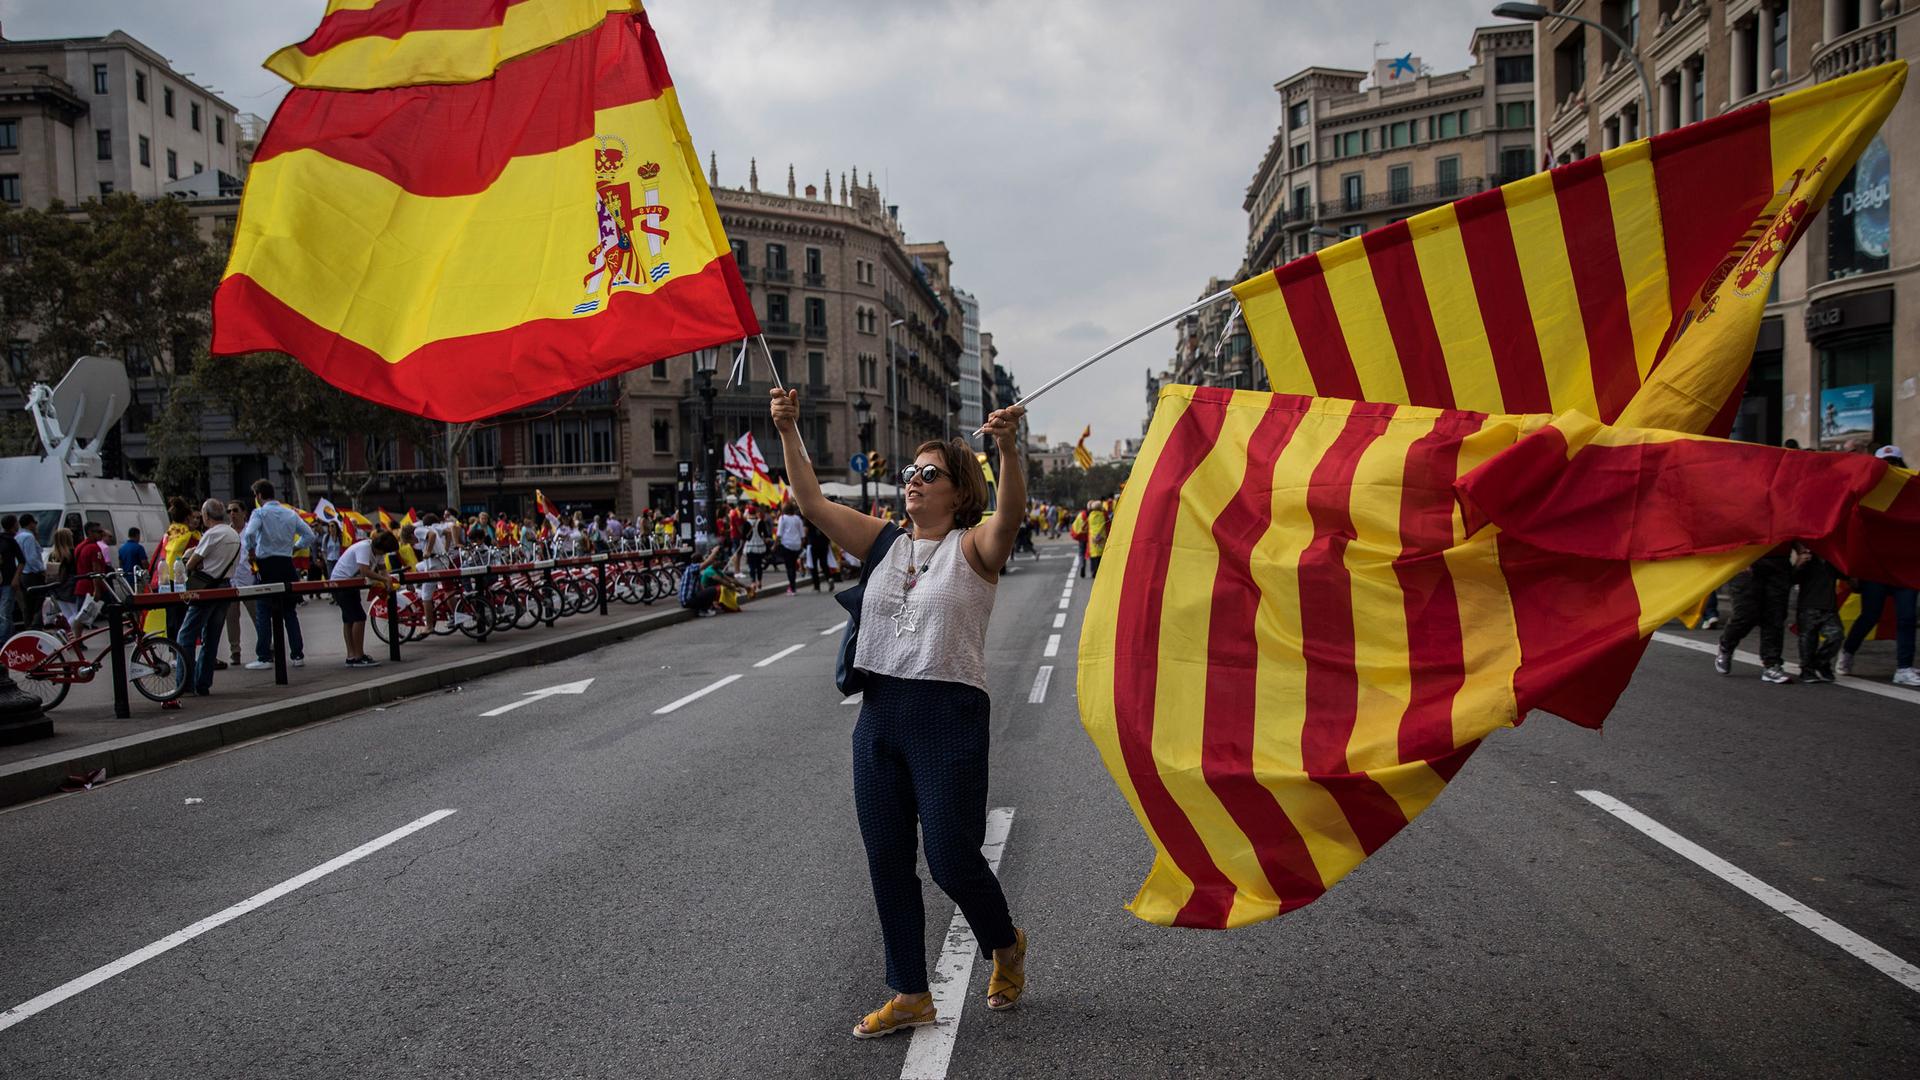 A woman waves flags of Catalonia and Spain as people celebrate a holiday known as "Dia de la Hispanidad" or Spain's National Day in Barcelona, Spain, Thursday, Oct. 12, 2017. 